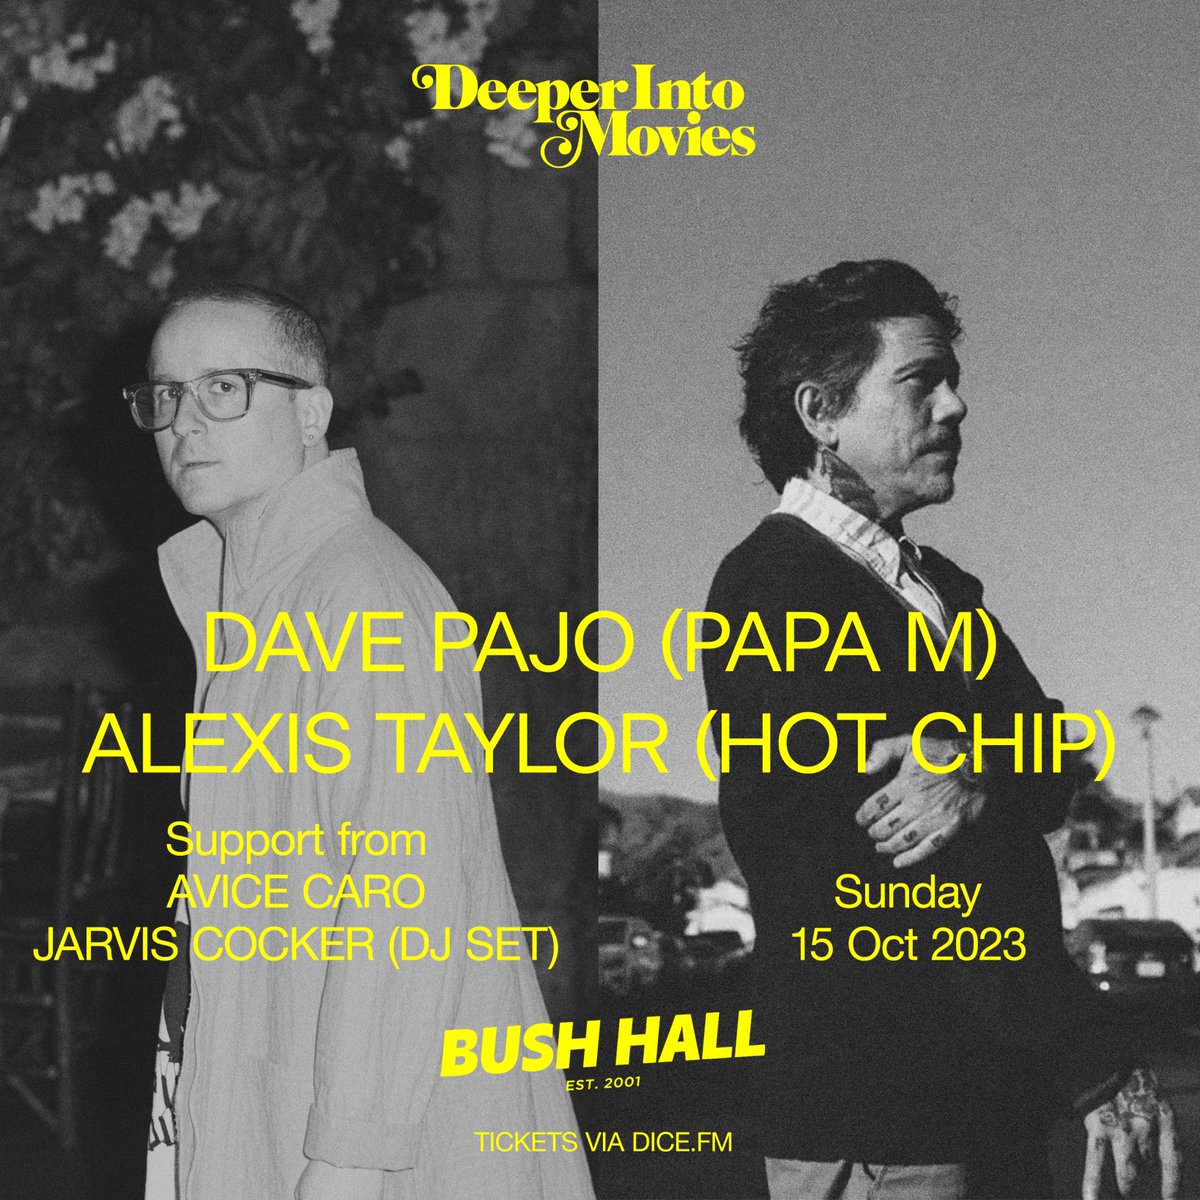 This week! @davidpajo (Papa M/Slint) + Alexis Taylor (@Hot_Chip) join forces for a special intimate show at Bush Hall, playing some of their favourite songs together Support from @BroadsideHacks Avice Caro and the marvellous Jarvis Cocker (DJ Set) 🎫 link.dice.fm/Md1aae8d6727